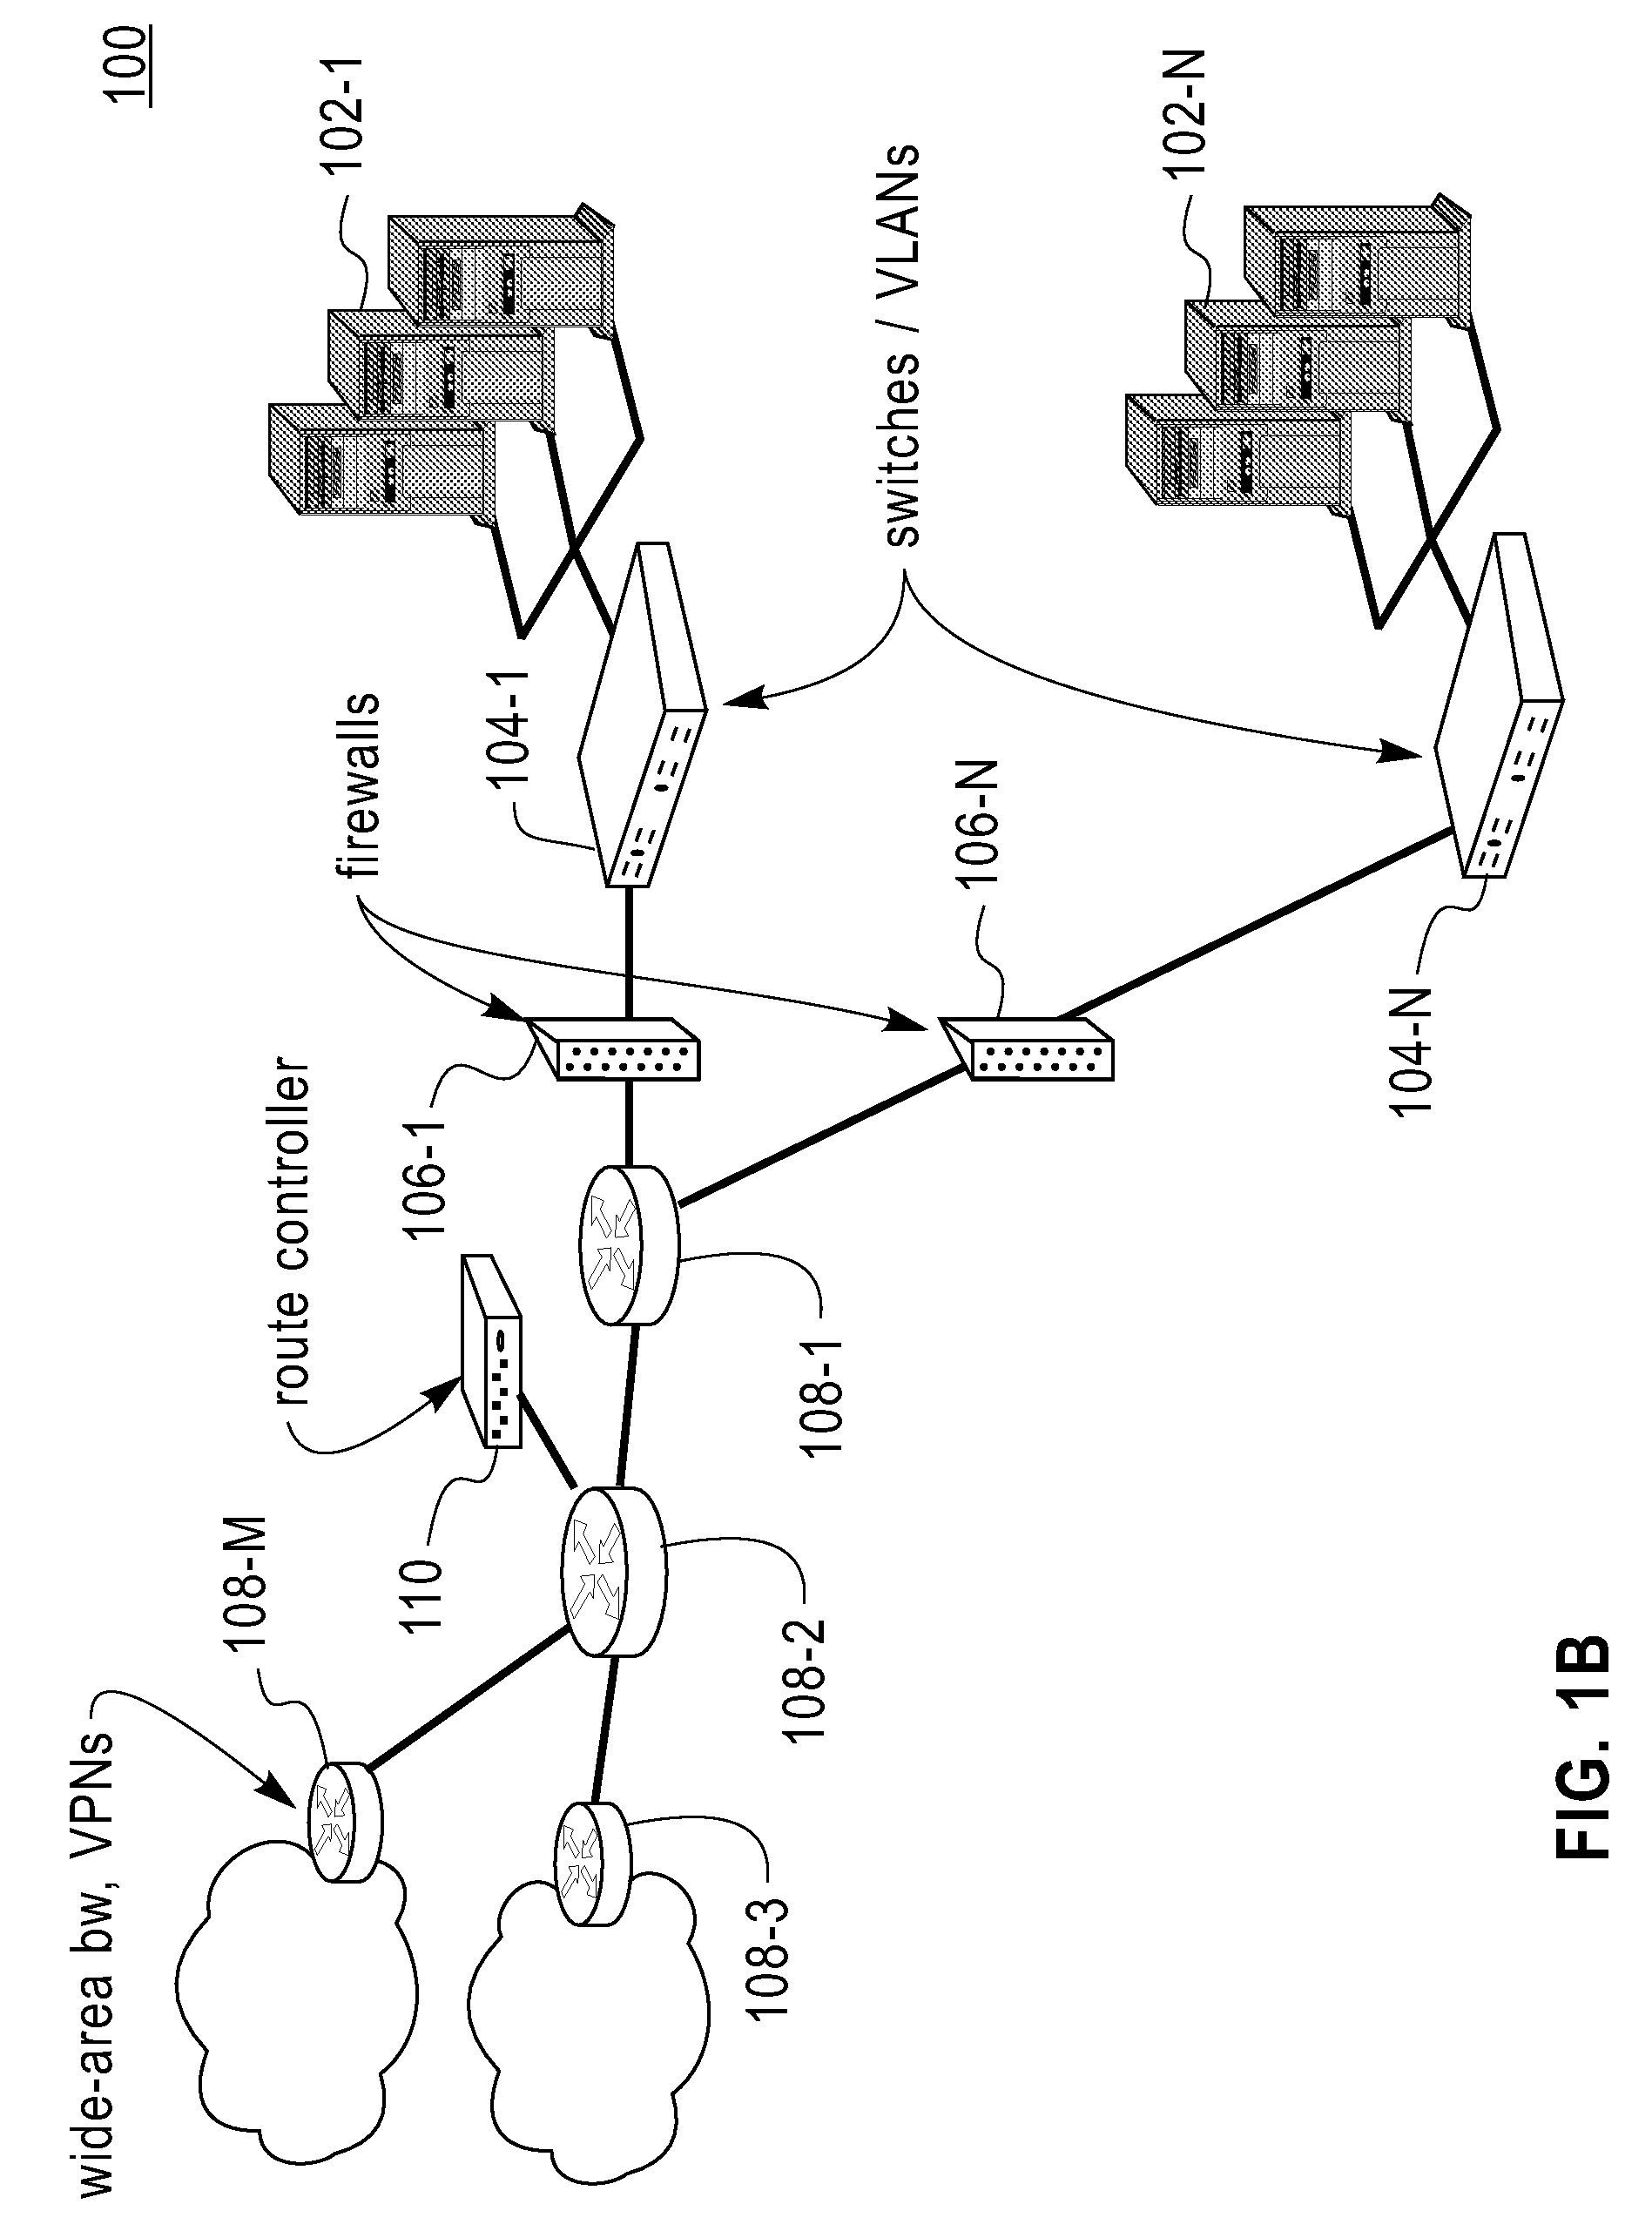 Method and apparatus for network distribution and provisioning of applications across multiple domains